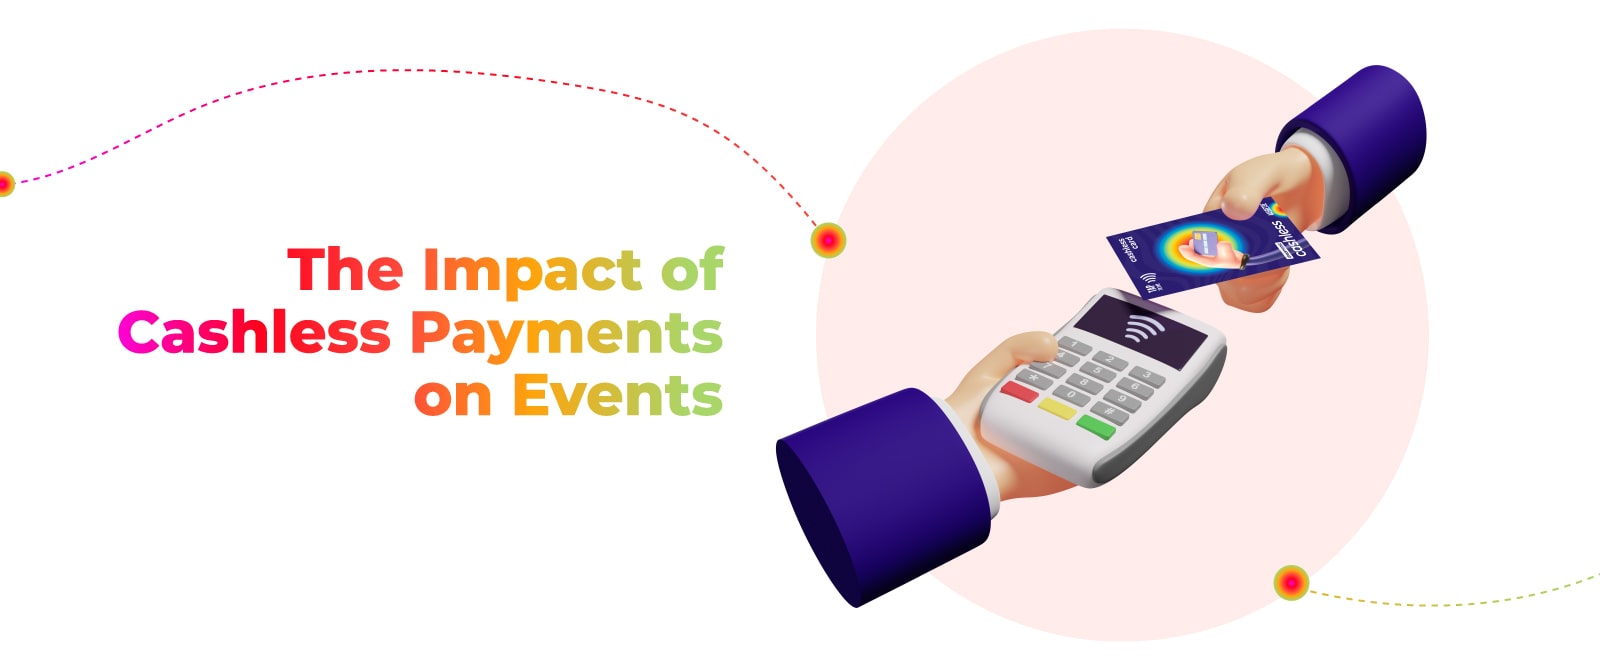 The Impact of Cashless Payments on Events